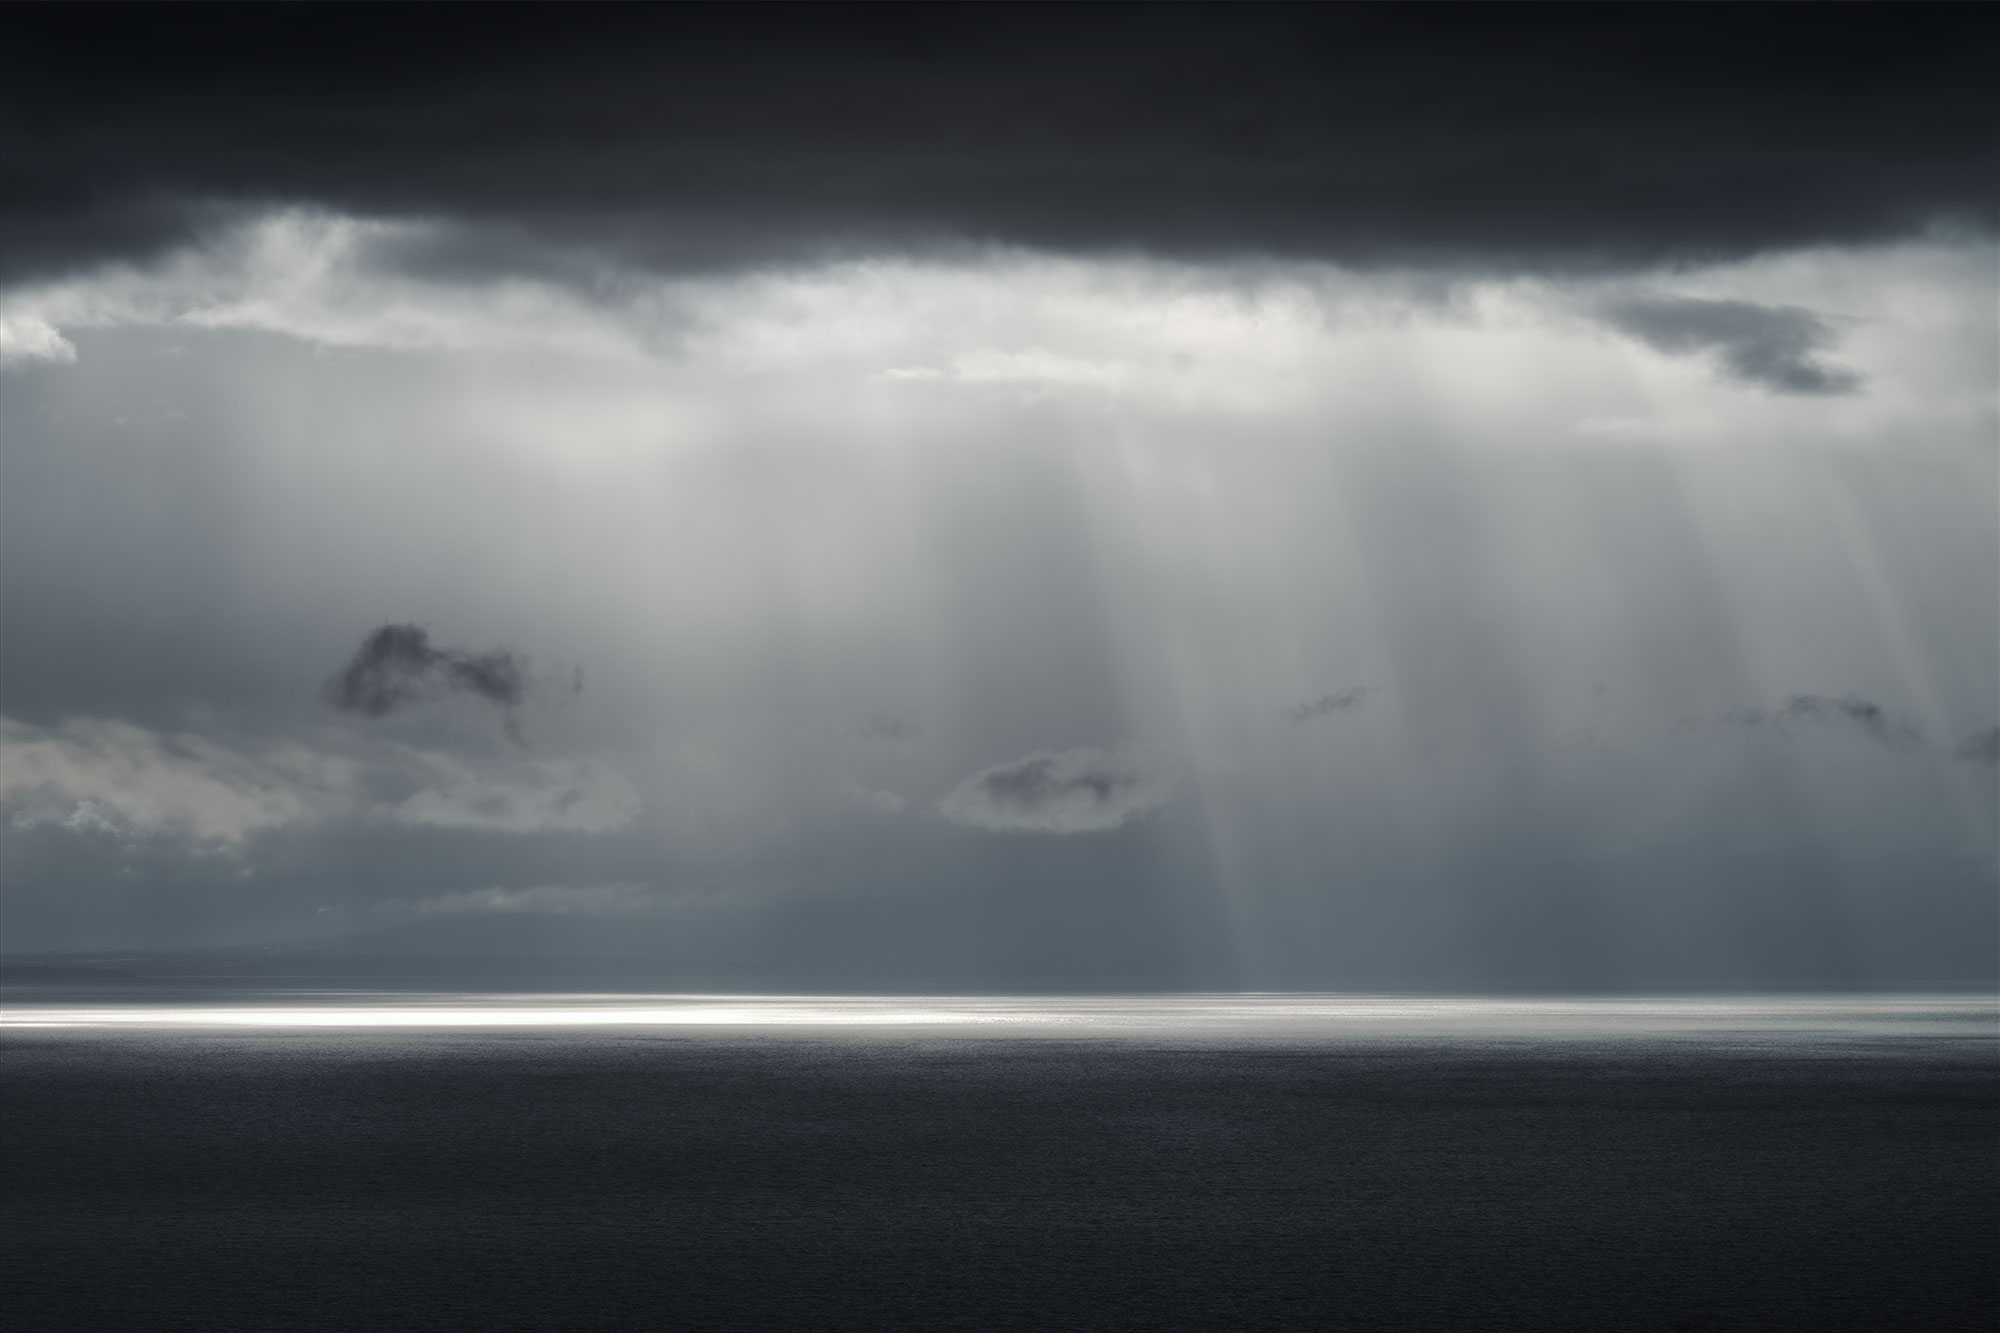 Scenic landscape photograph capturing dramatic light above Lake Geneva on a rainy day. A ray of light pierces through the clouds, illuminating the water. Taken in Chexbres, Lavaux, Switzerland, by Swiss photographer Jennifer Esseiva using her Nikon Z8.